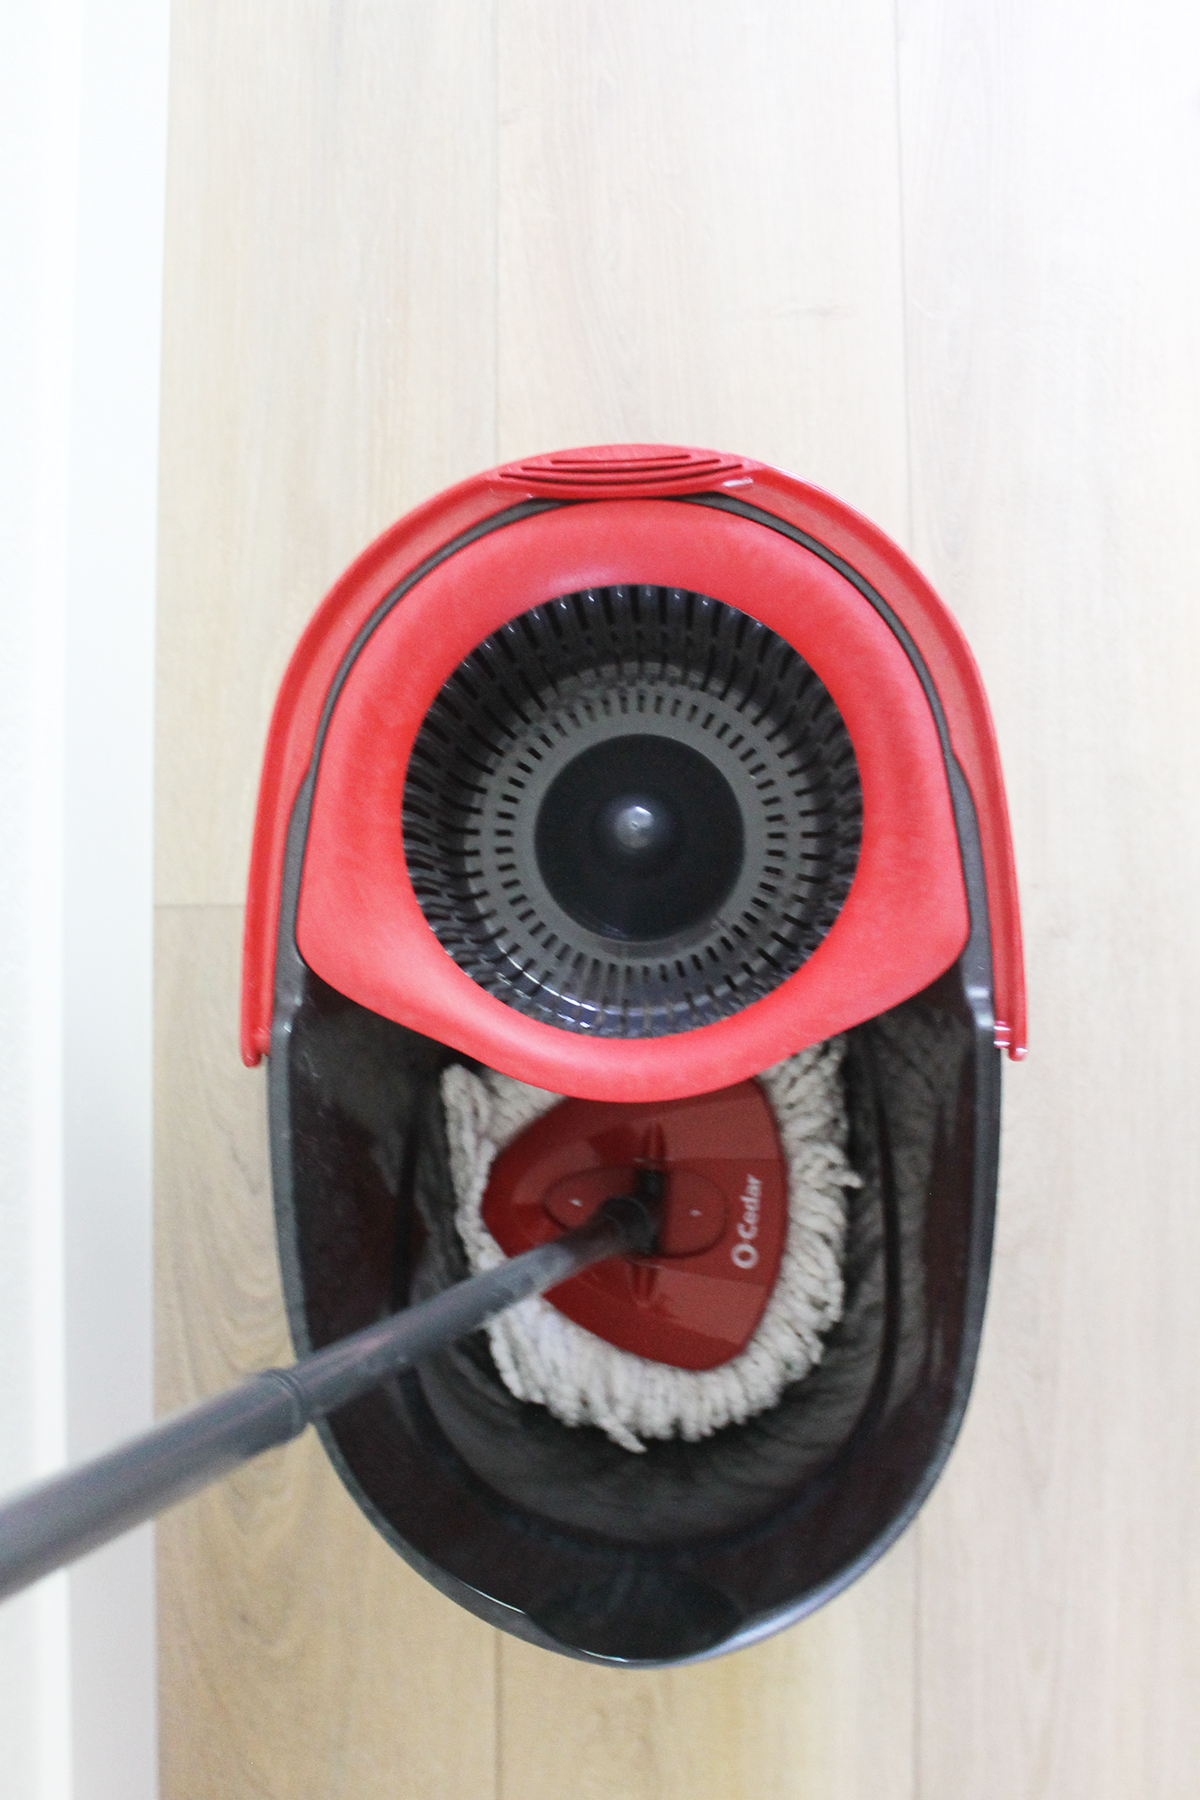 How a Spin Mop Improved My Life – The Best Spin Mops on the Market